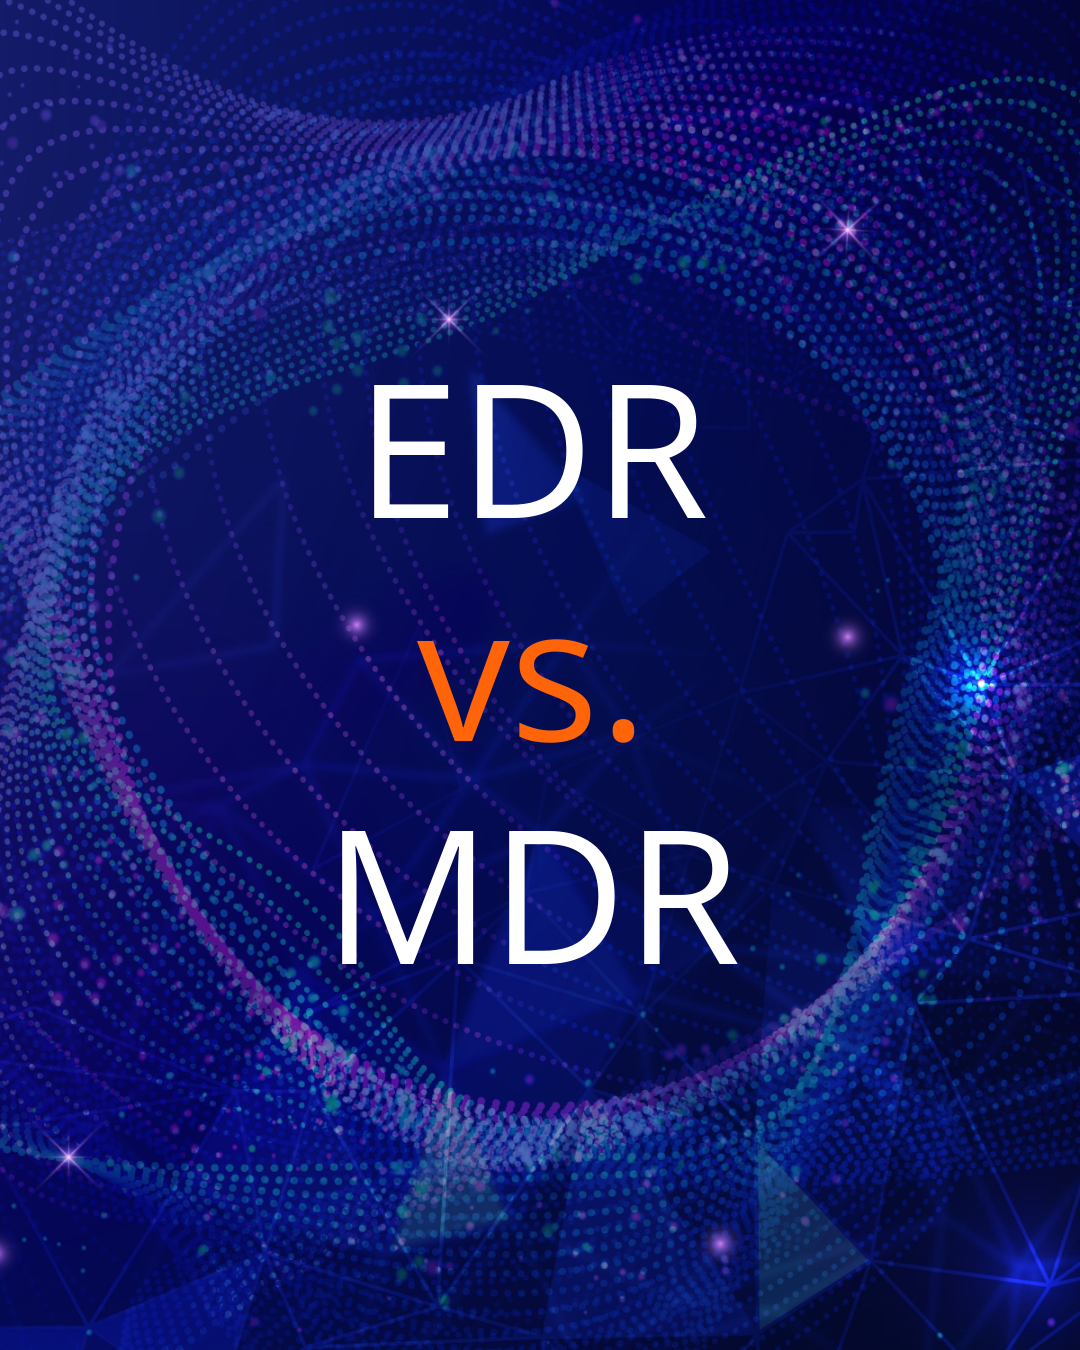 EDR and MDR - Essential Security Benefits